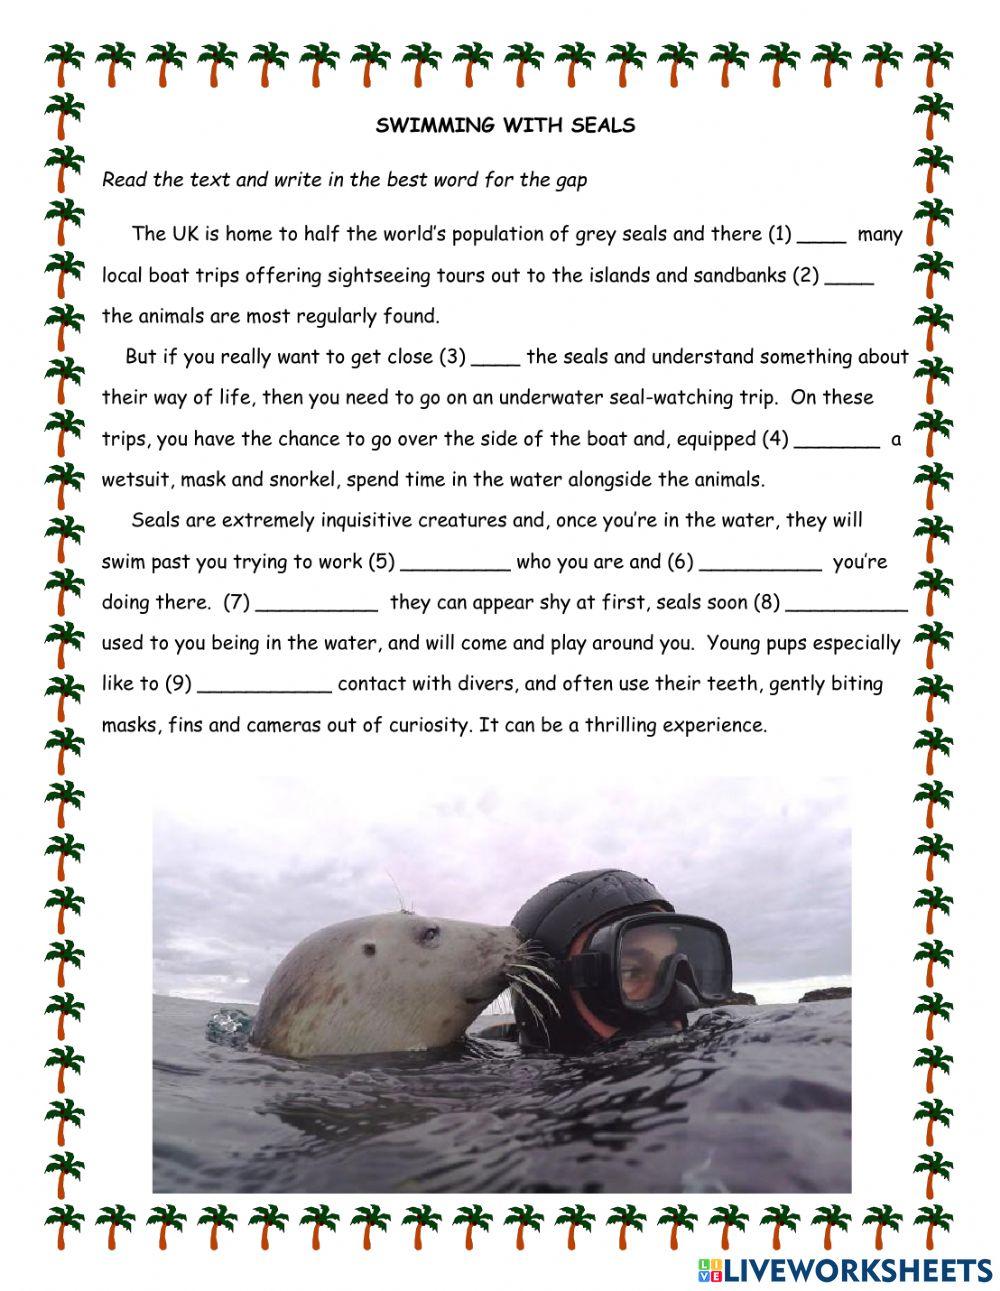 Swimming with Seals FCE Use of English